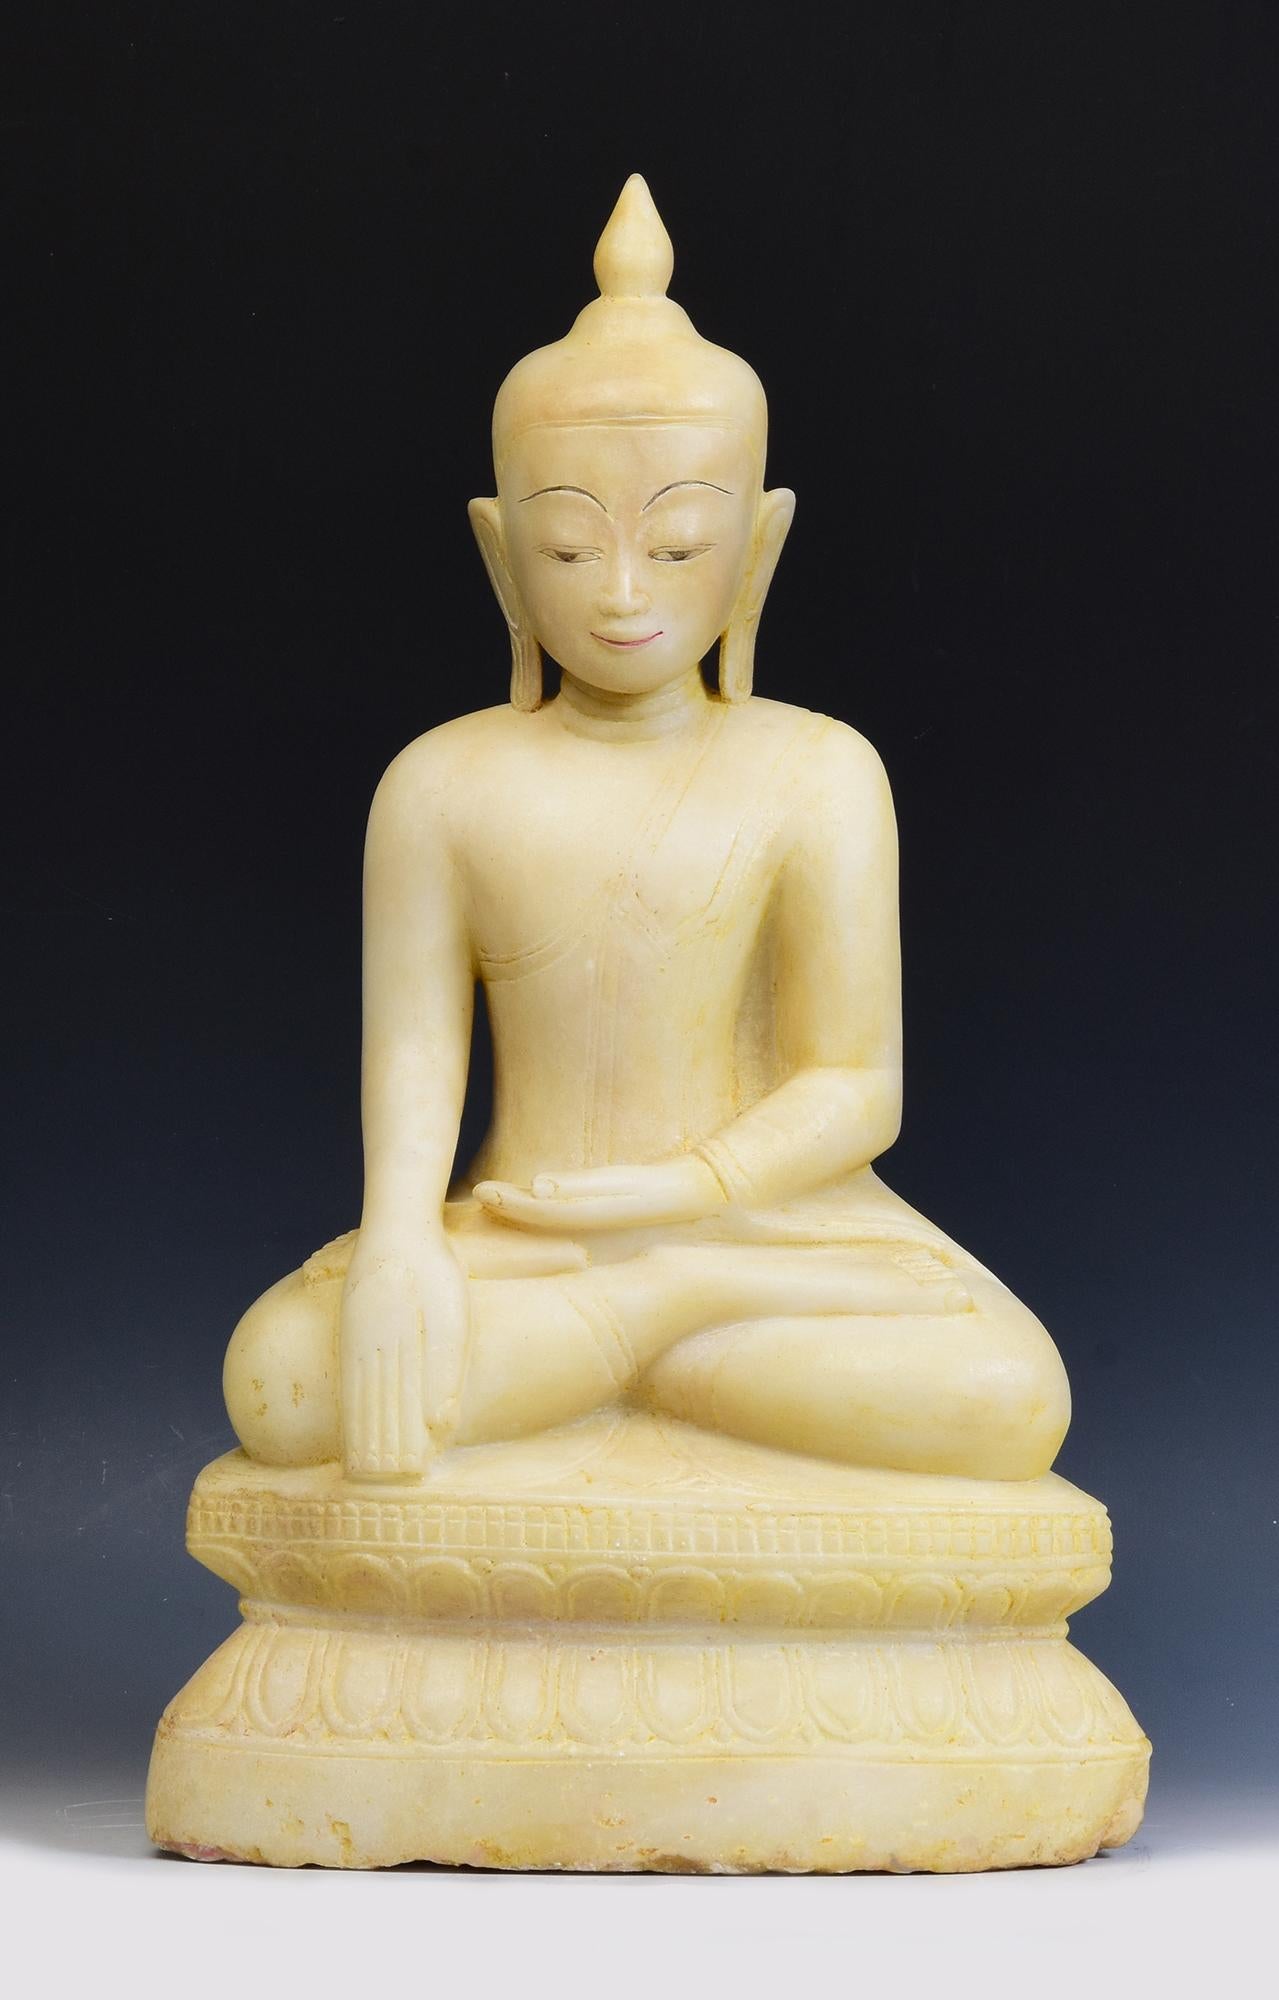 Antique Burmese alabaster Buddha sitting in Mara Vijaya (calling the earth to witness) posture on a base.

Age: Burma, Shan Period, 17th - 18th Century
Size: Height 55 C.M. / Width 32.5 C.M. / Depth 19 C.M.
Condition: Nice condition overall (some